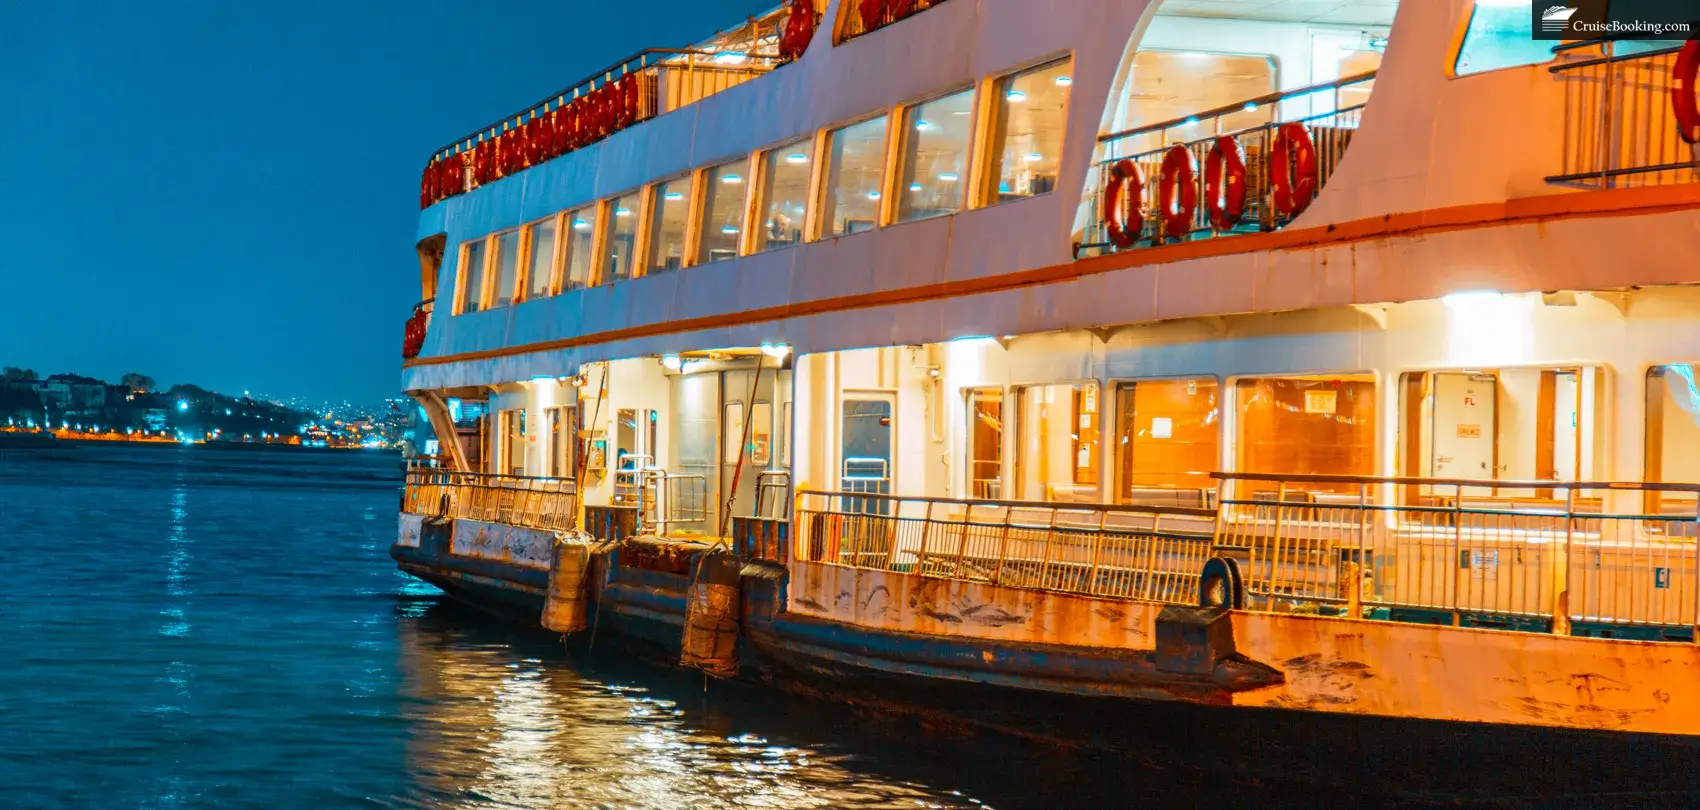 At twilight, a river cruise ship ferry can be seen